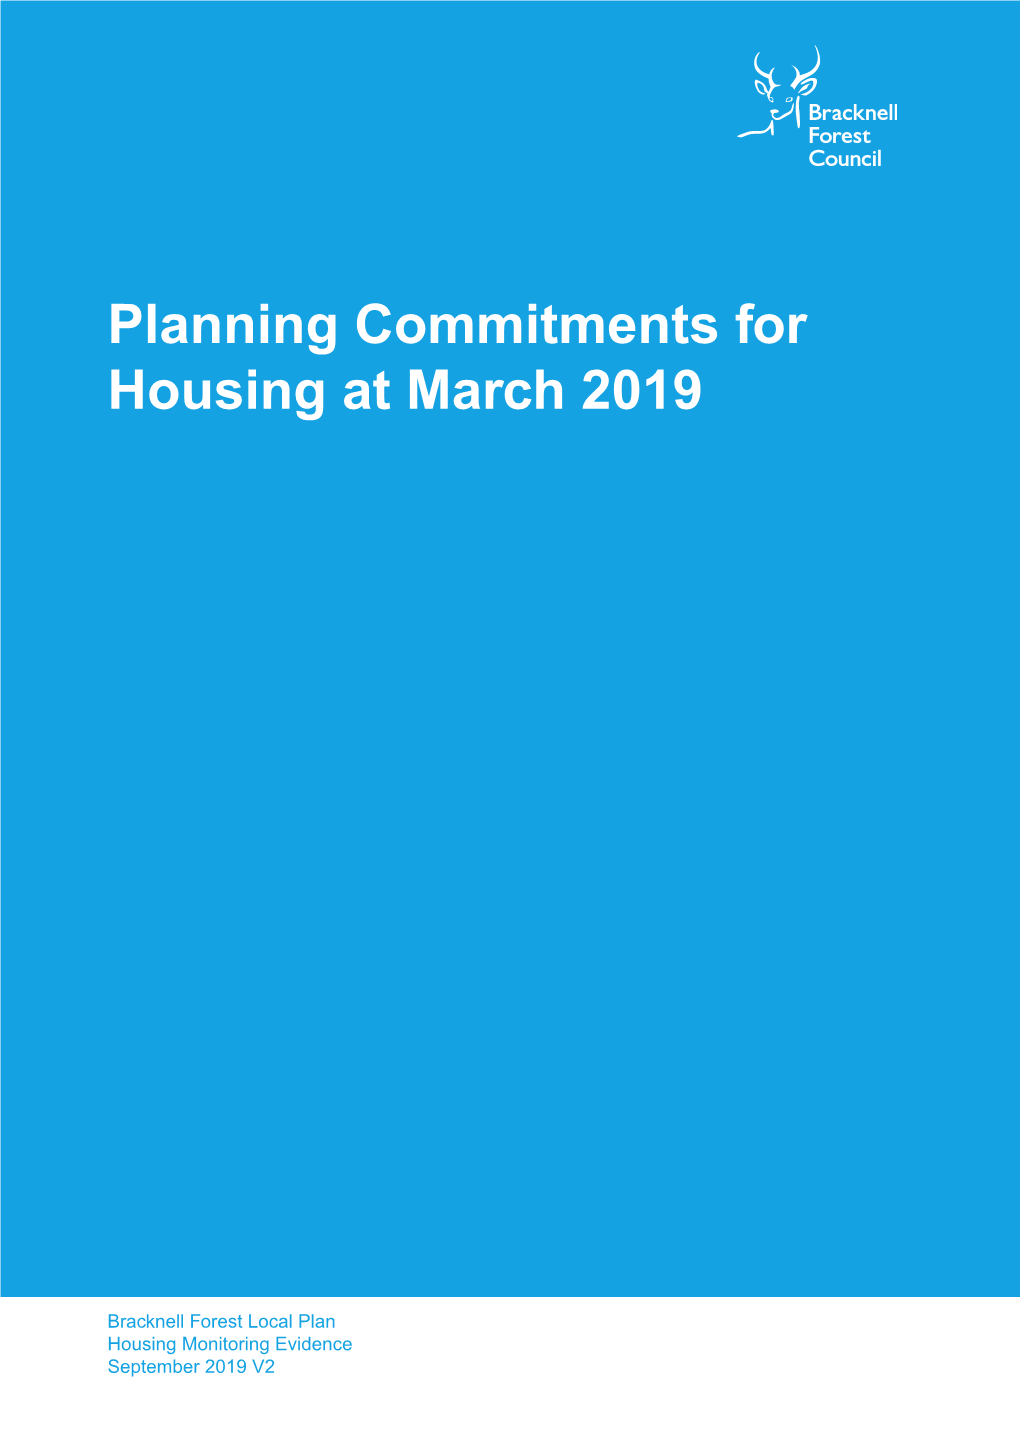 Planning Commitments for Housing at March 2019